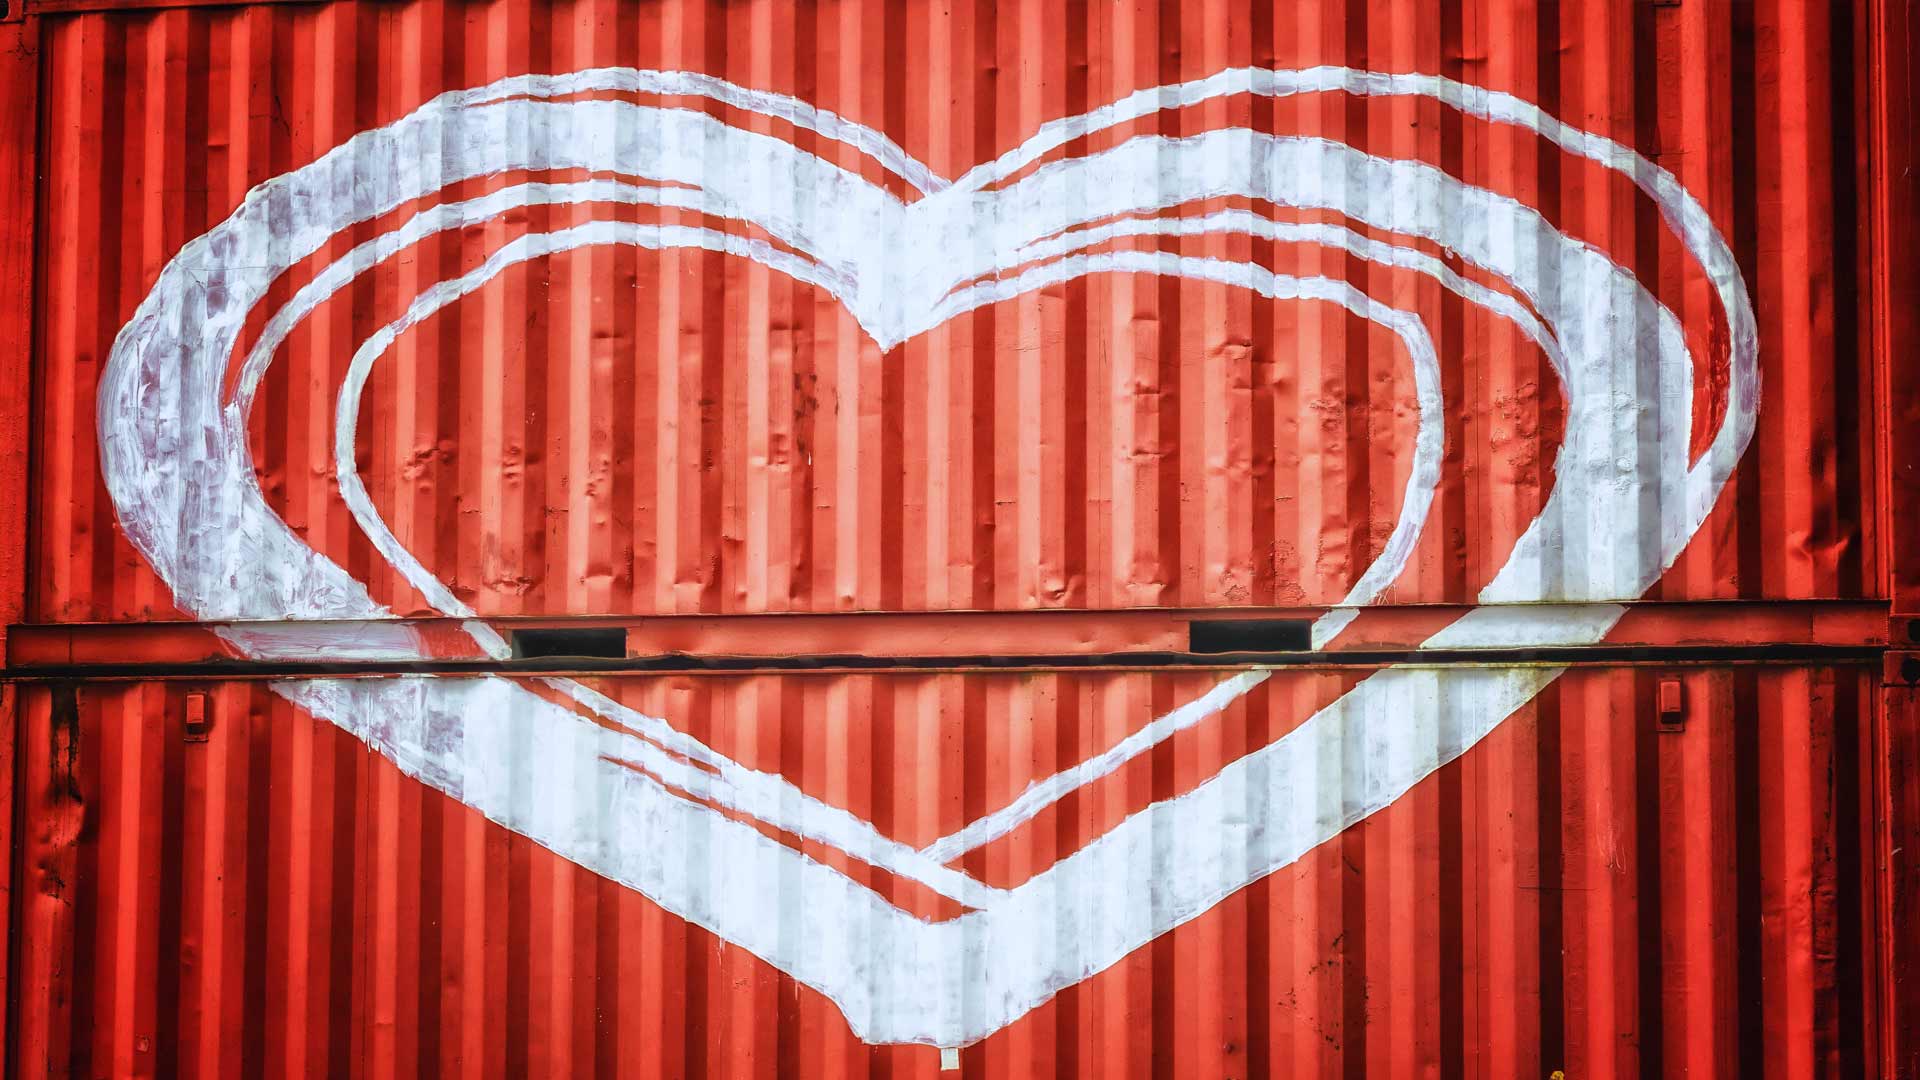 container-love-red-heart.jpg